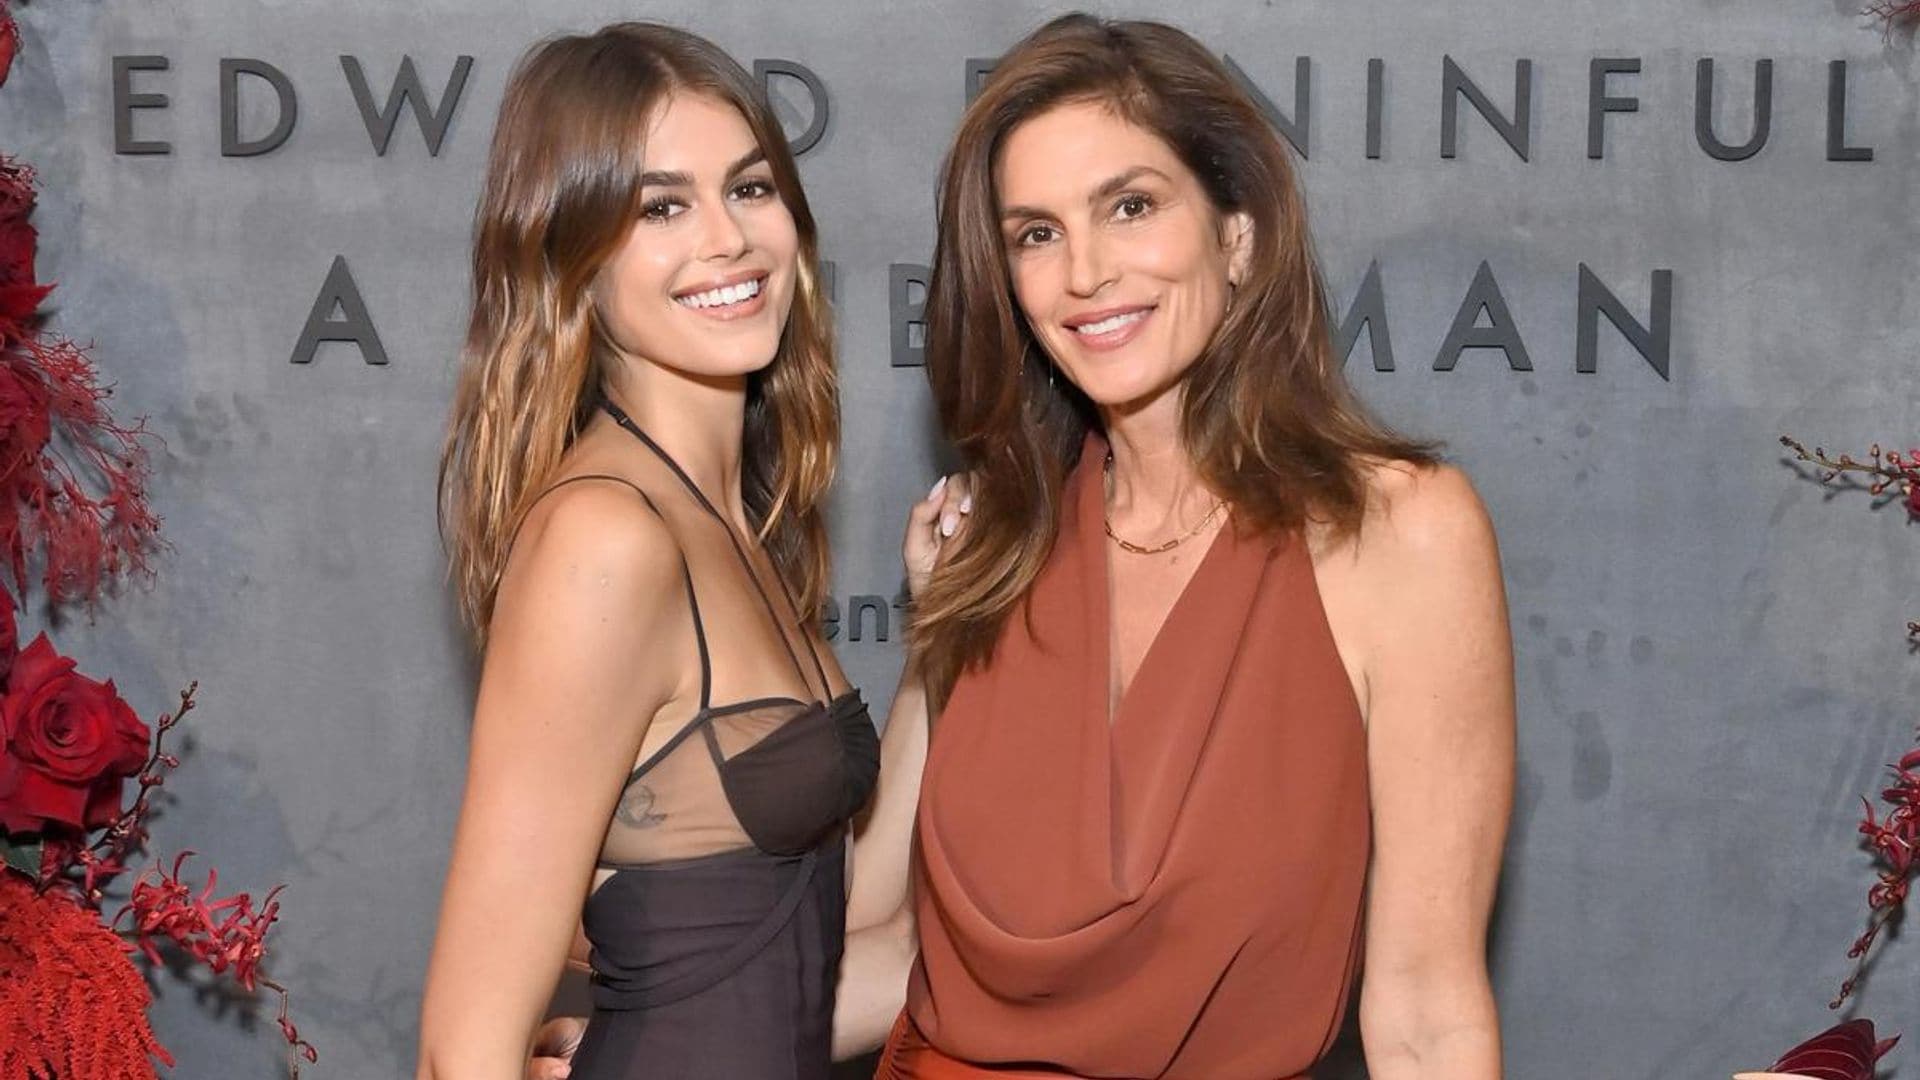 Cindy Crawford’s daughter Kaia Gerber says her acting success is not from being a nepo baby